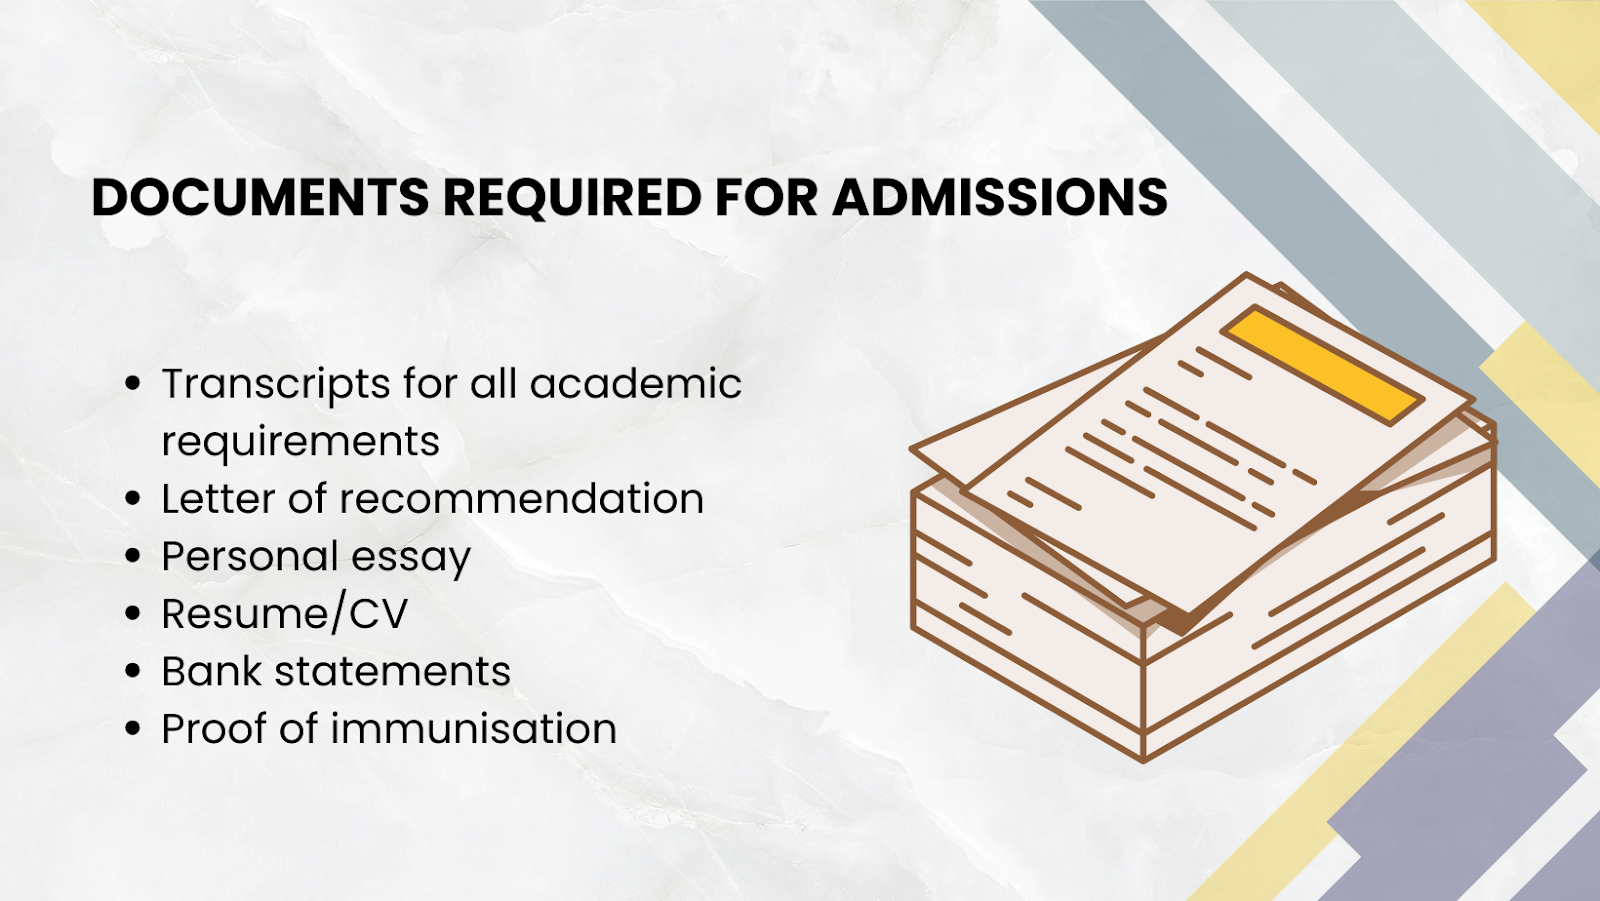 Documents required for Embry Riddle Aeronautical University admission.